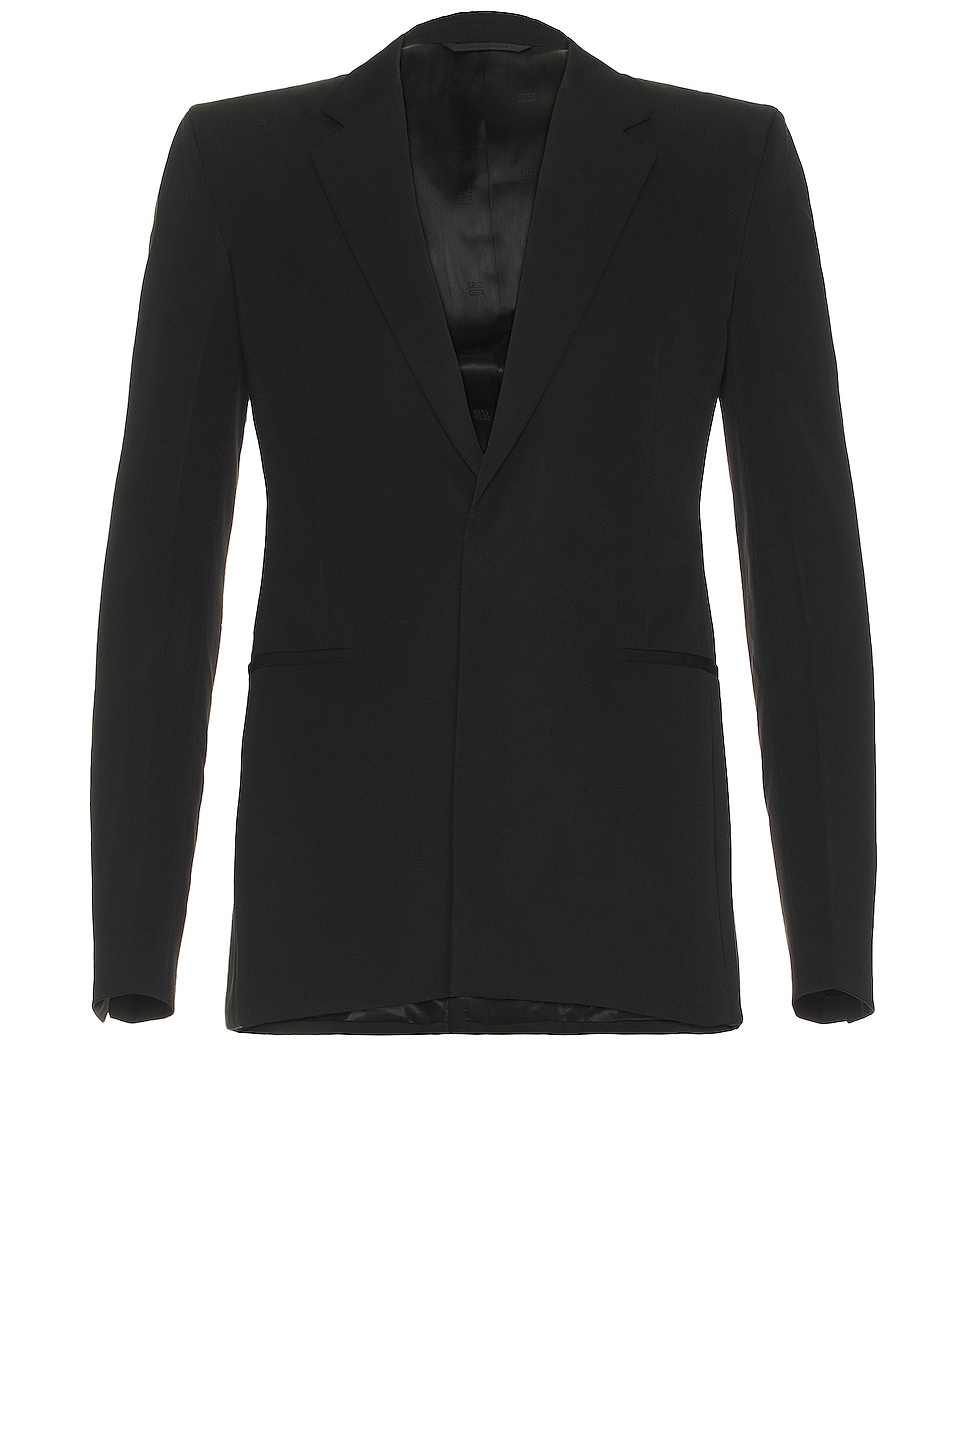 Image 1 of Givenchy Fitted Blazer in Black